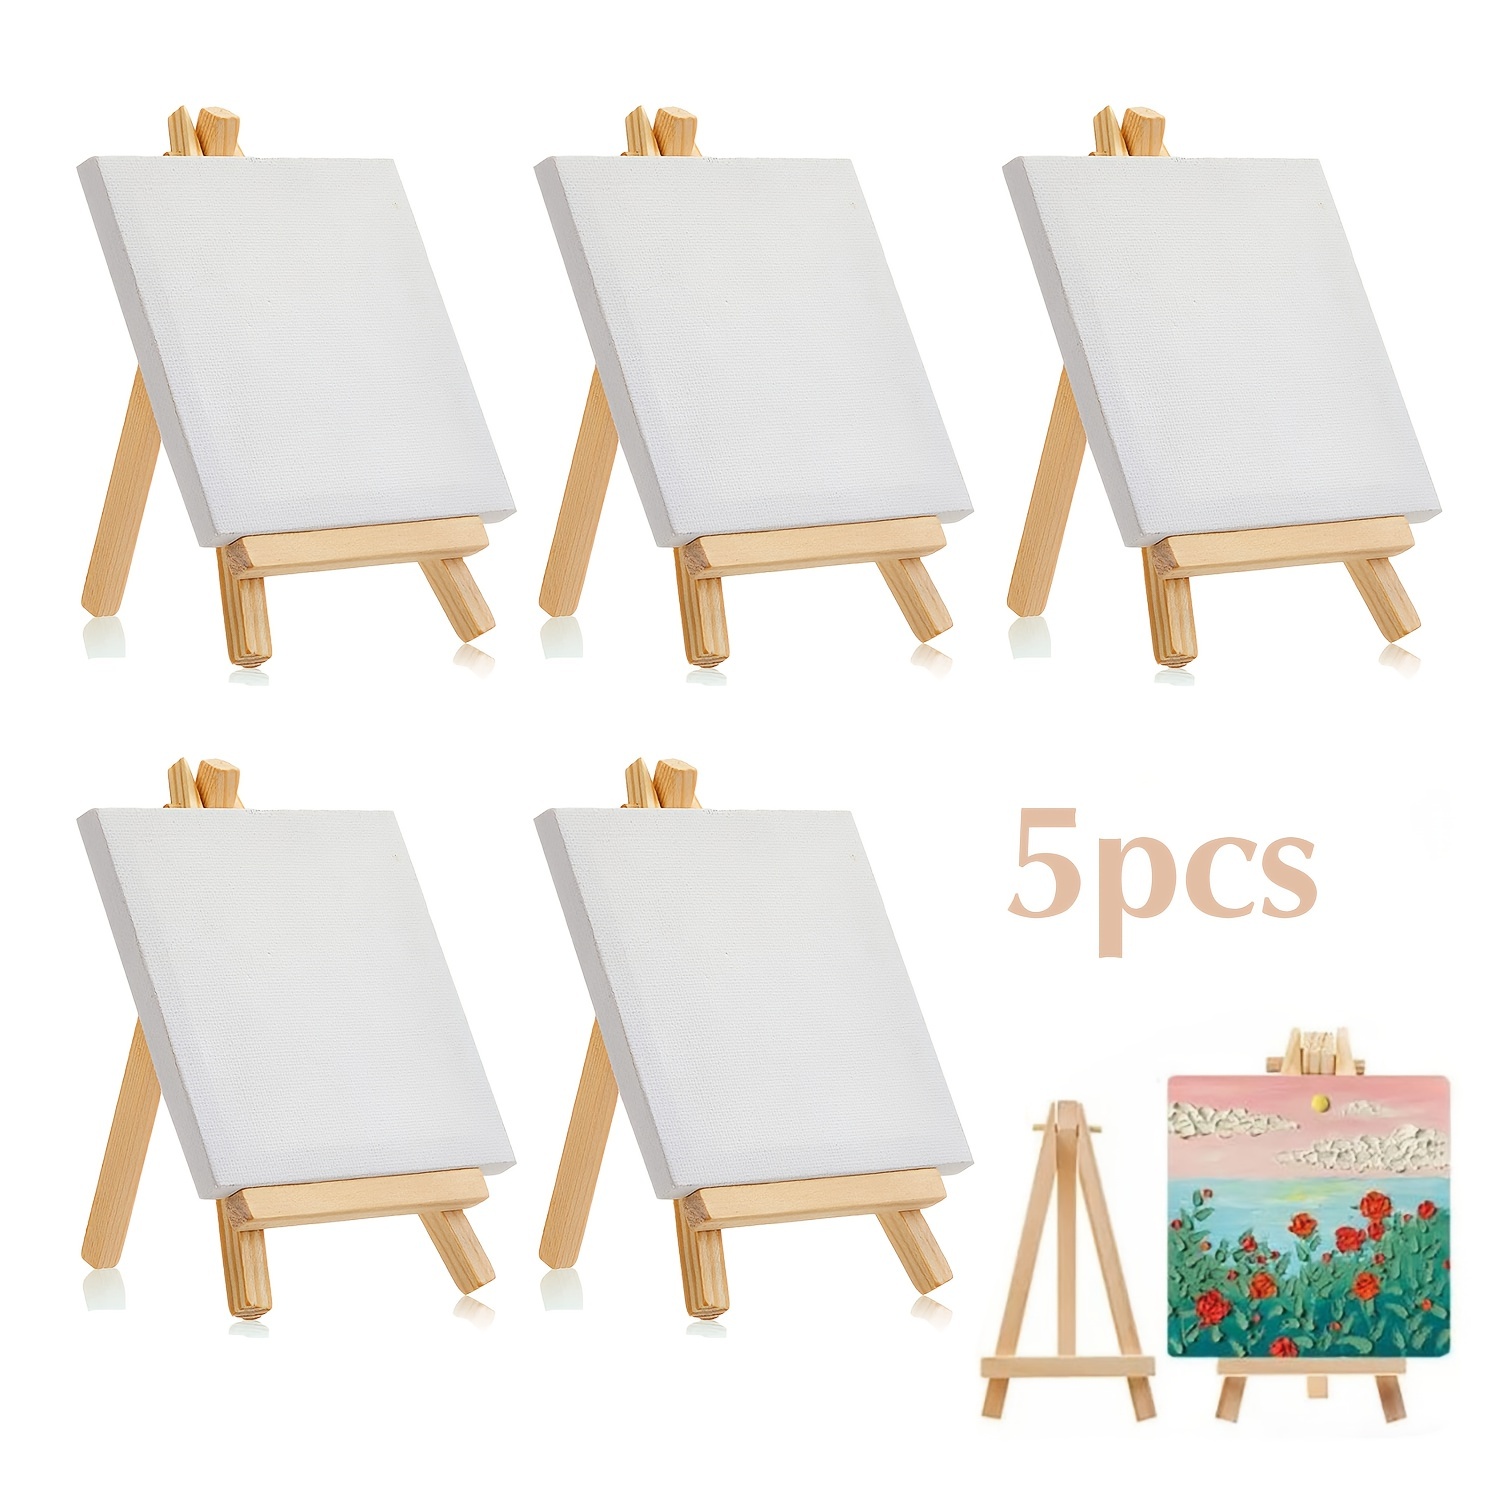 5 Packs 4inx 4in Mini Canvas And Easel Set, Small Art Easel Stand With  Canvas Set, Tabletop Wooden Display Stand And Canvas Panels For Artist,  Student